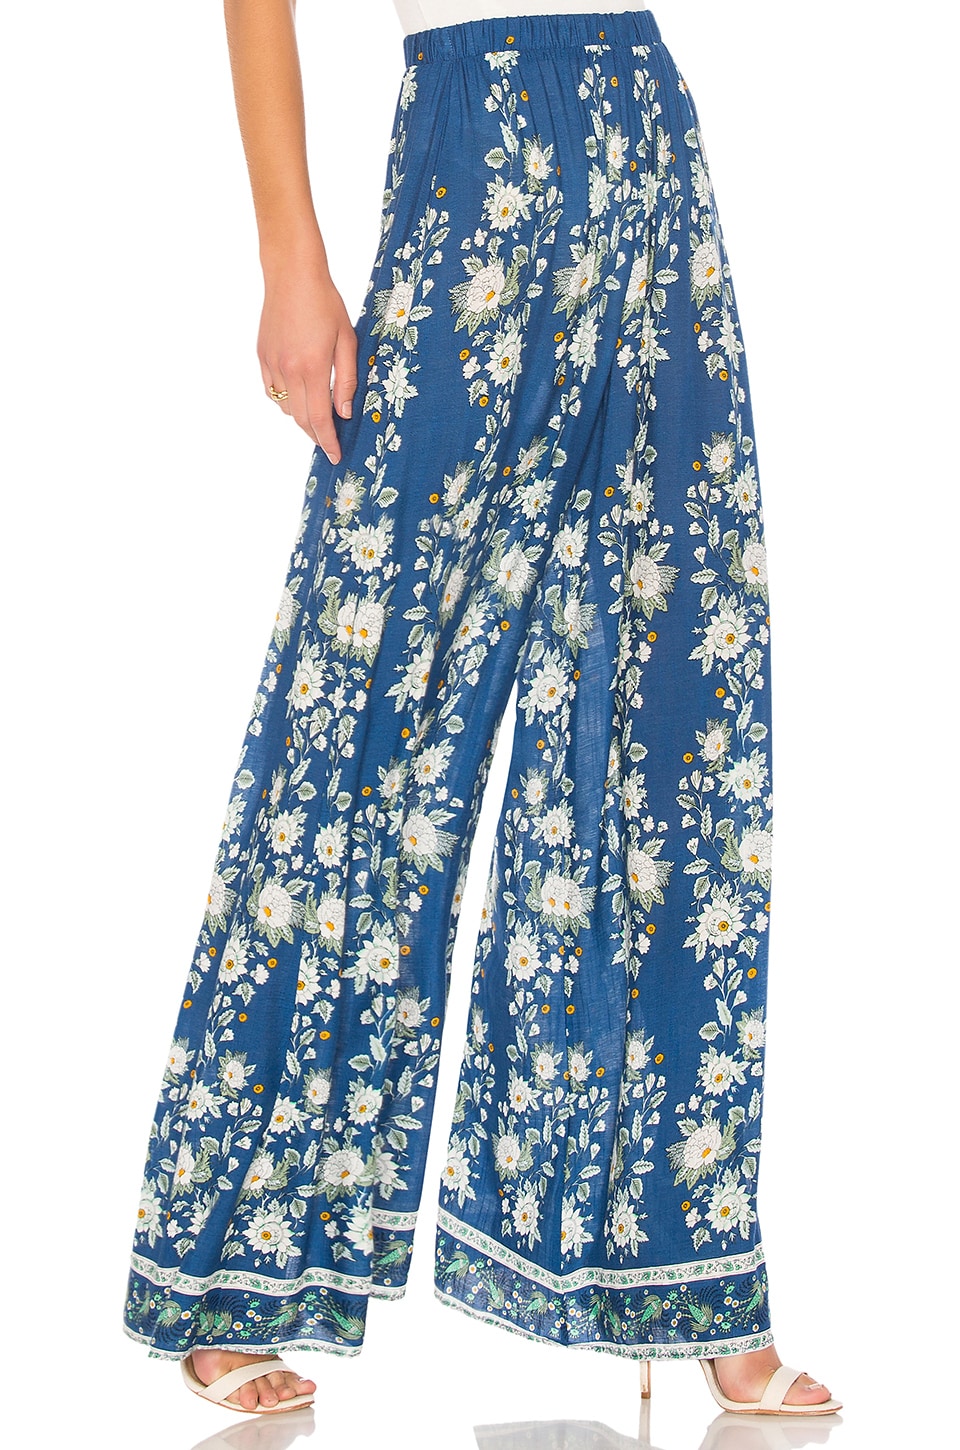 Show Me Your Mumu Best Pants in Brunch of Blooms Cruise | REVOLVE